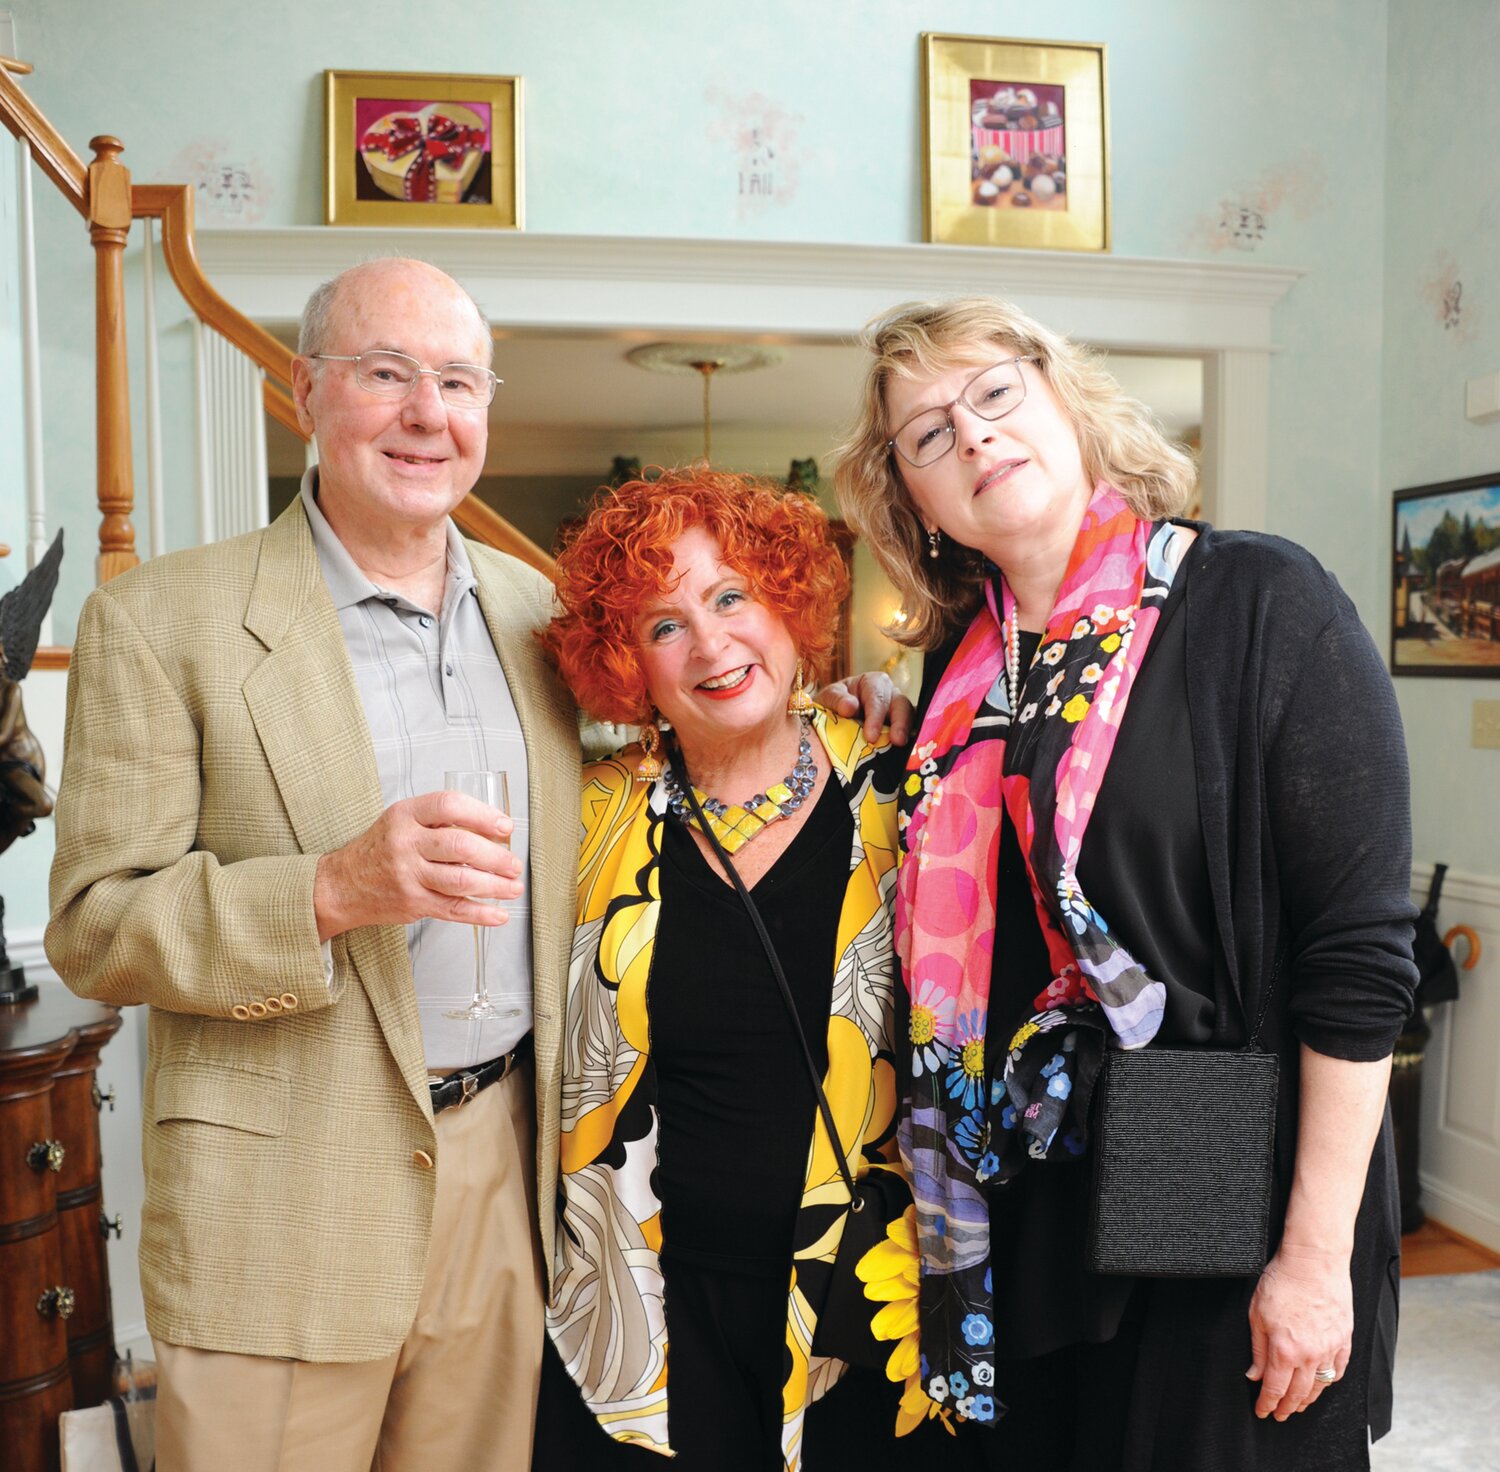 New Hope artist Pearl Mintzer, center, poses with her husband Chuck and Tracey Ketterer on April 22 at a fundraising cocktail party for the Academy of Vocal Arts.